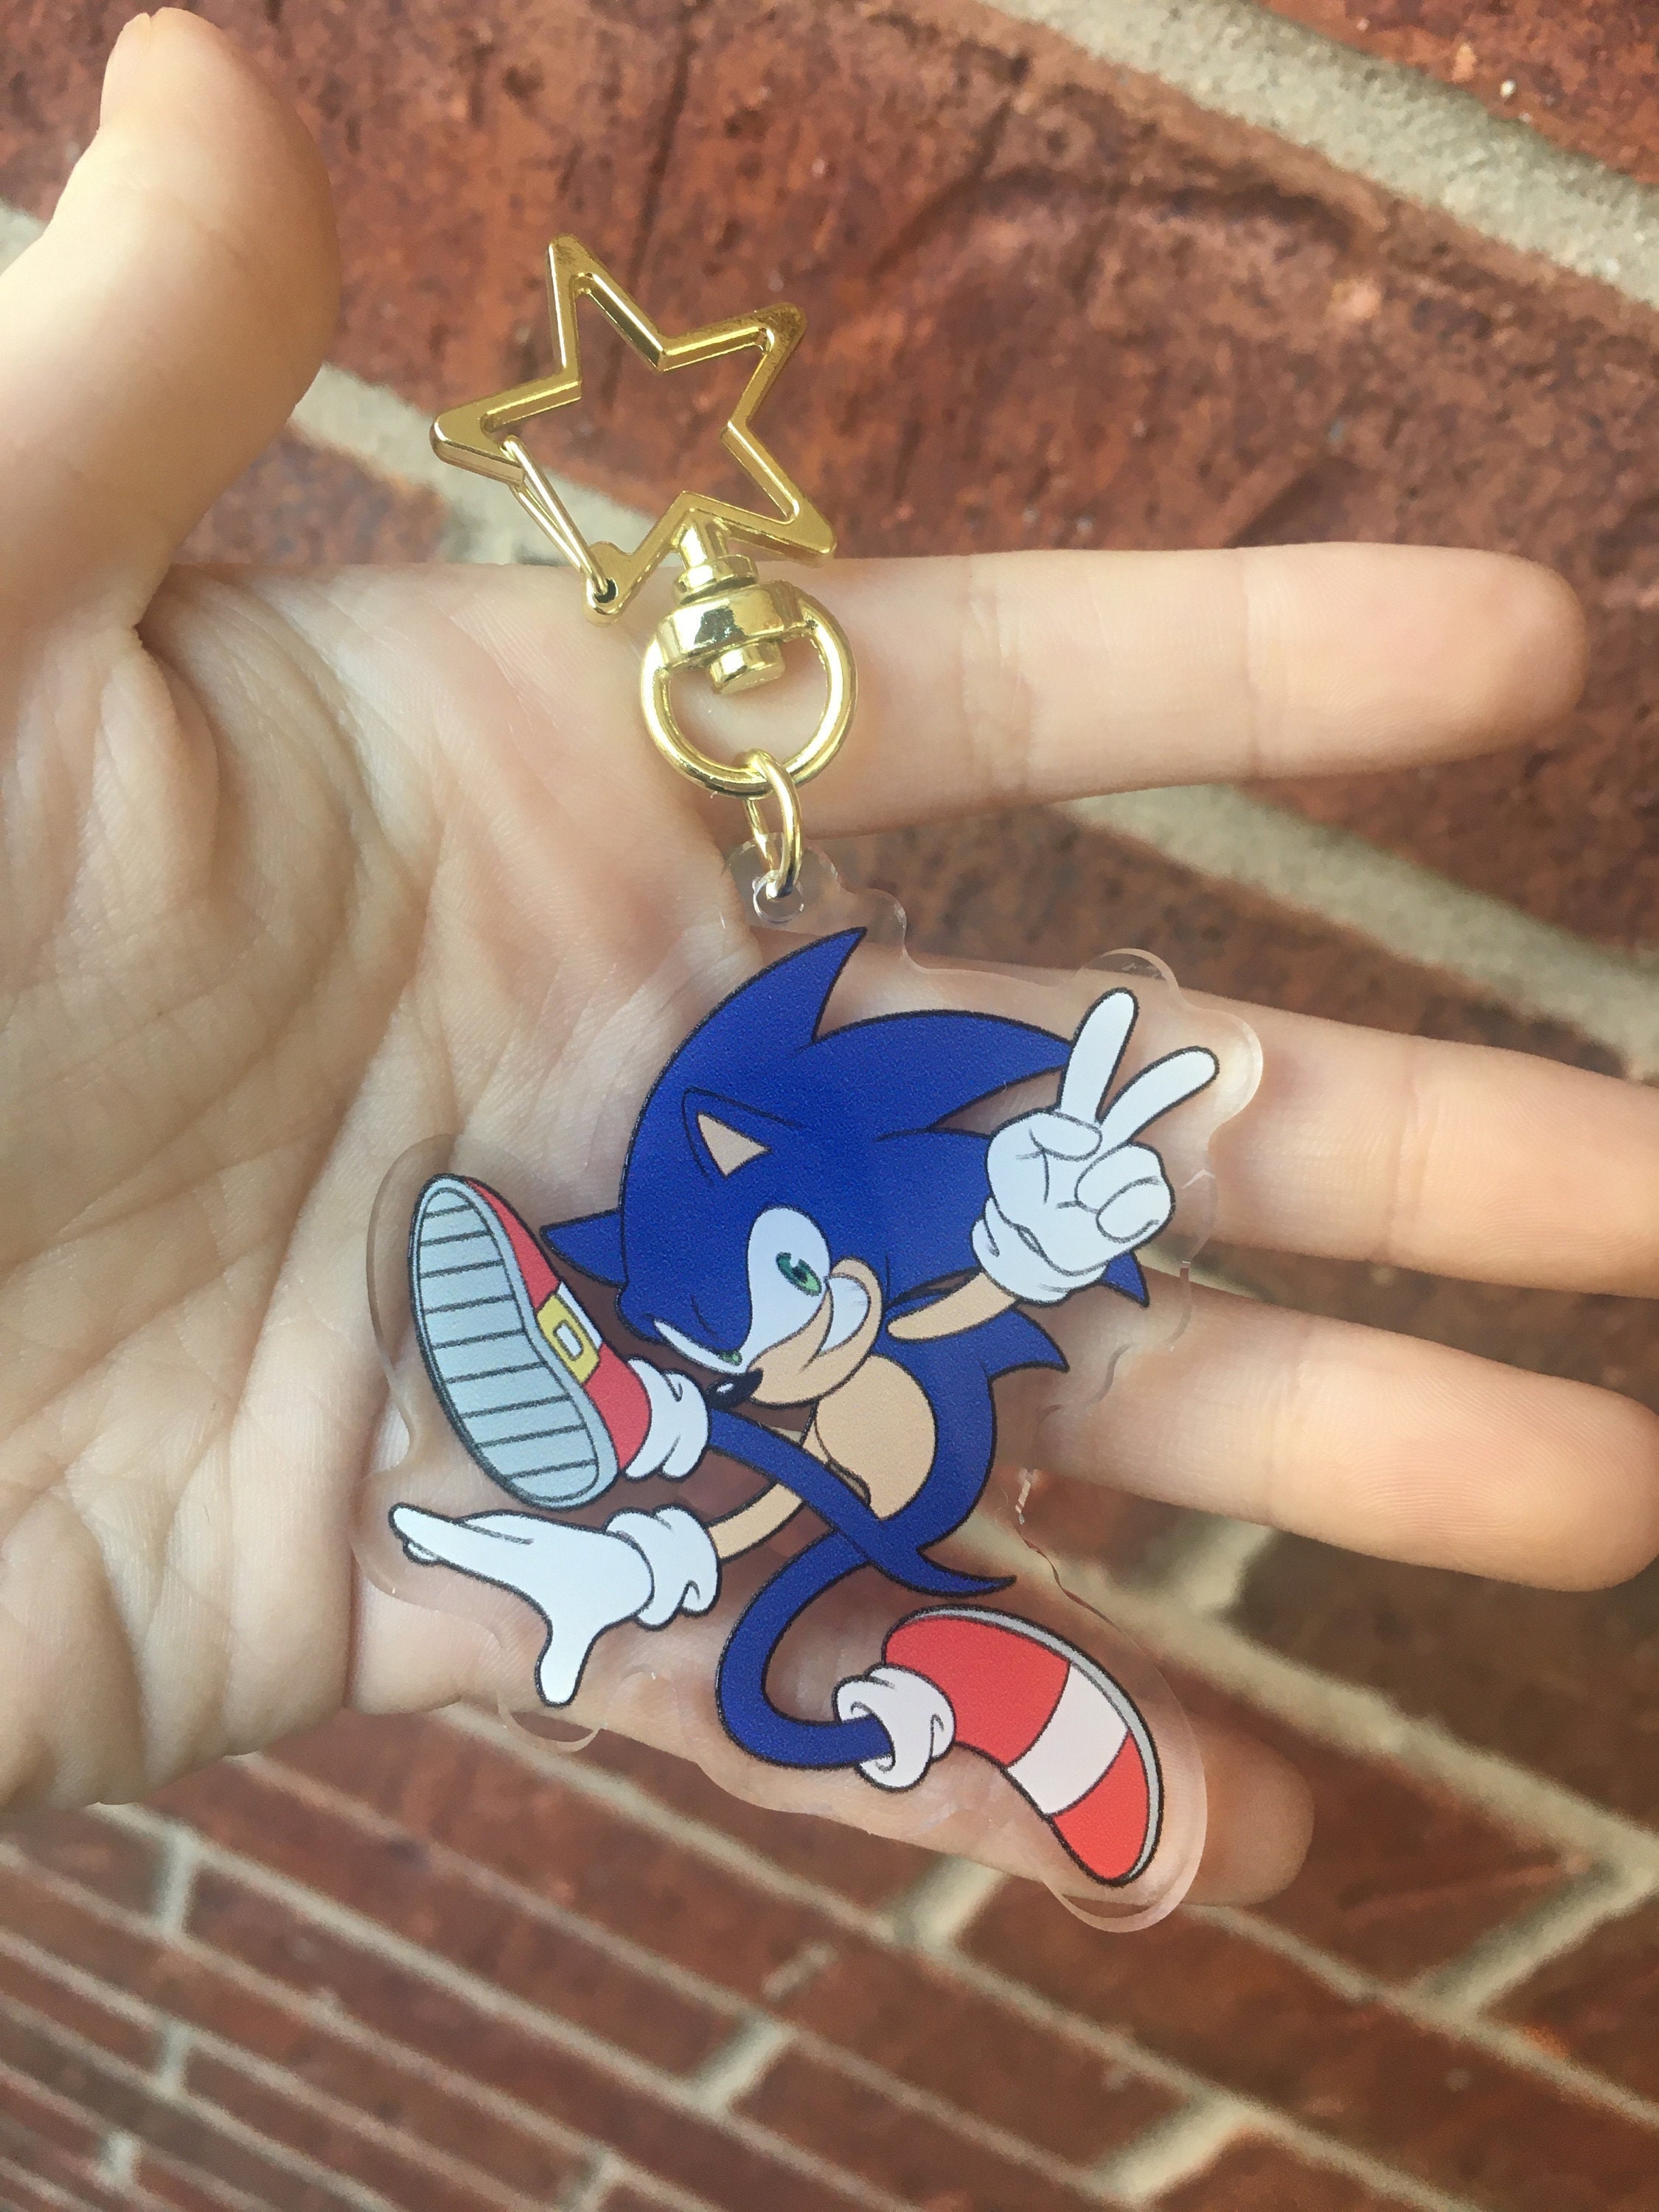 Crossing My Fingers Hoping For Metal Sonic To Be In Sonic Movie 2! :  r/SonicTheHedgehog